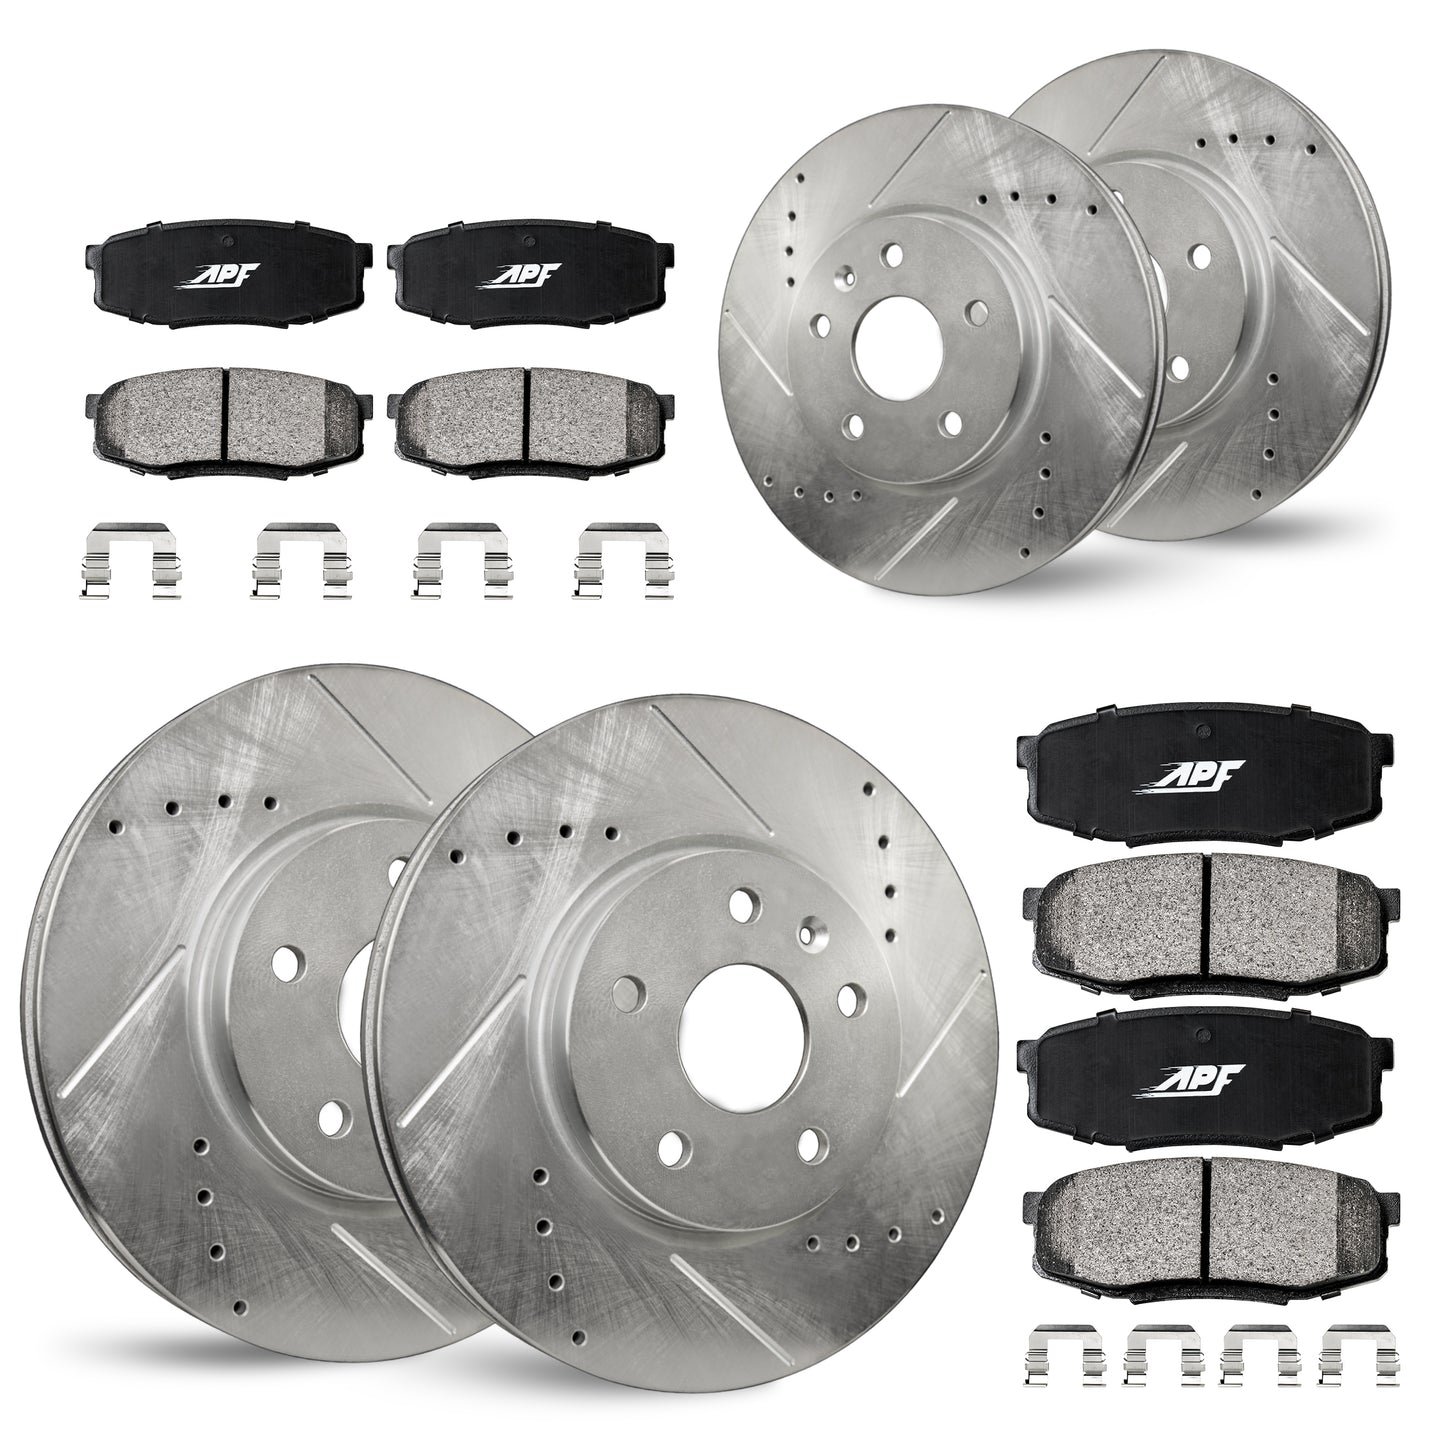 APF Full Kit compatible with Toyota Land Cruiser 2008-2015 | Zinc Drilled Slotted Rotors with Ceramic Carbon Fiber Brake Pads